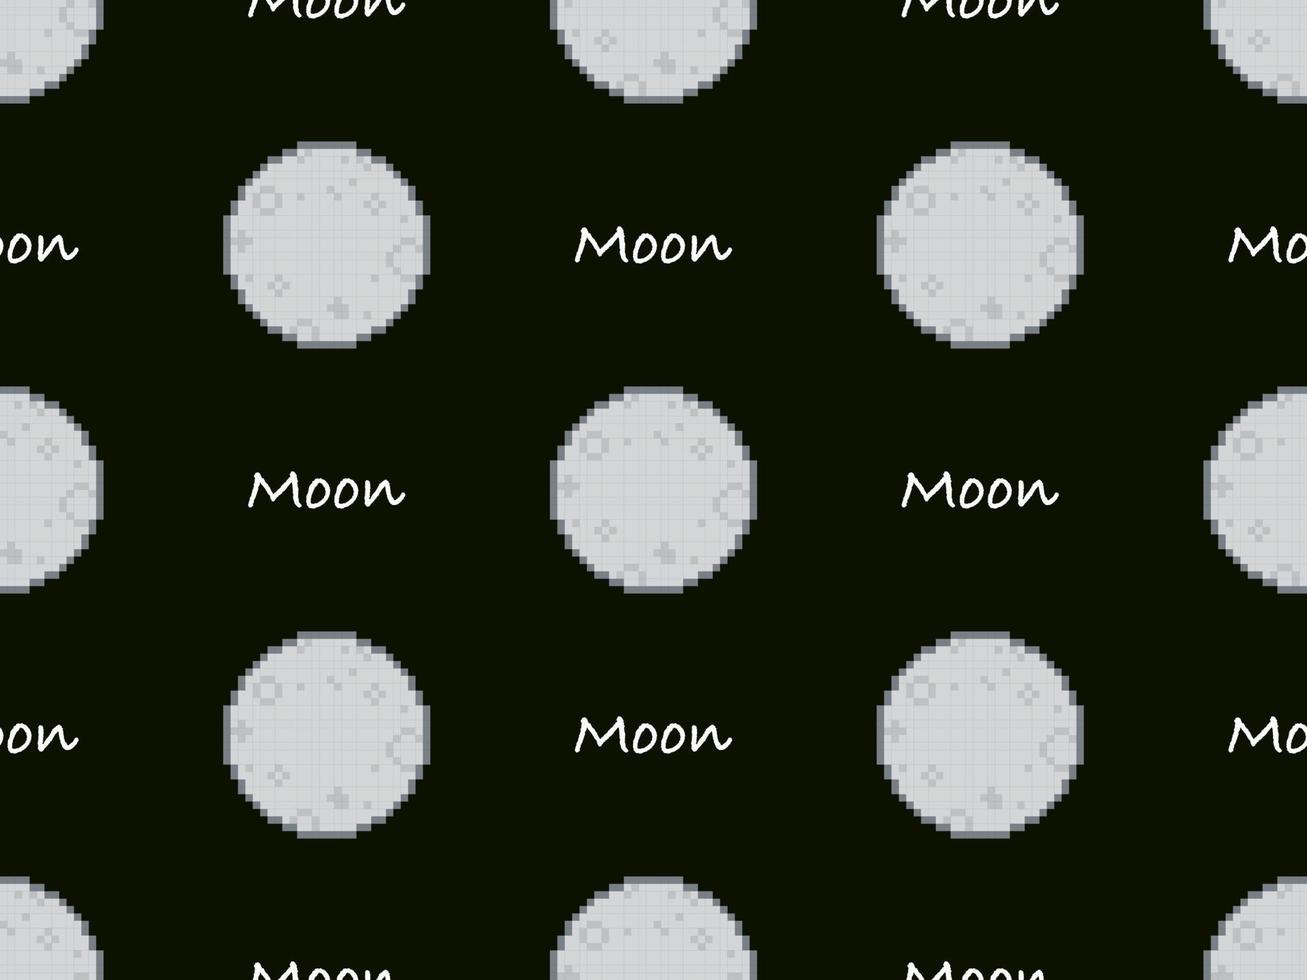 Moon cartoon character seamless pattern on black background. Pixel style.. vector